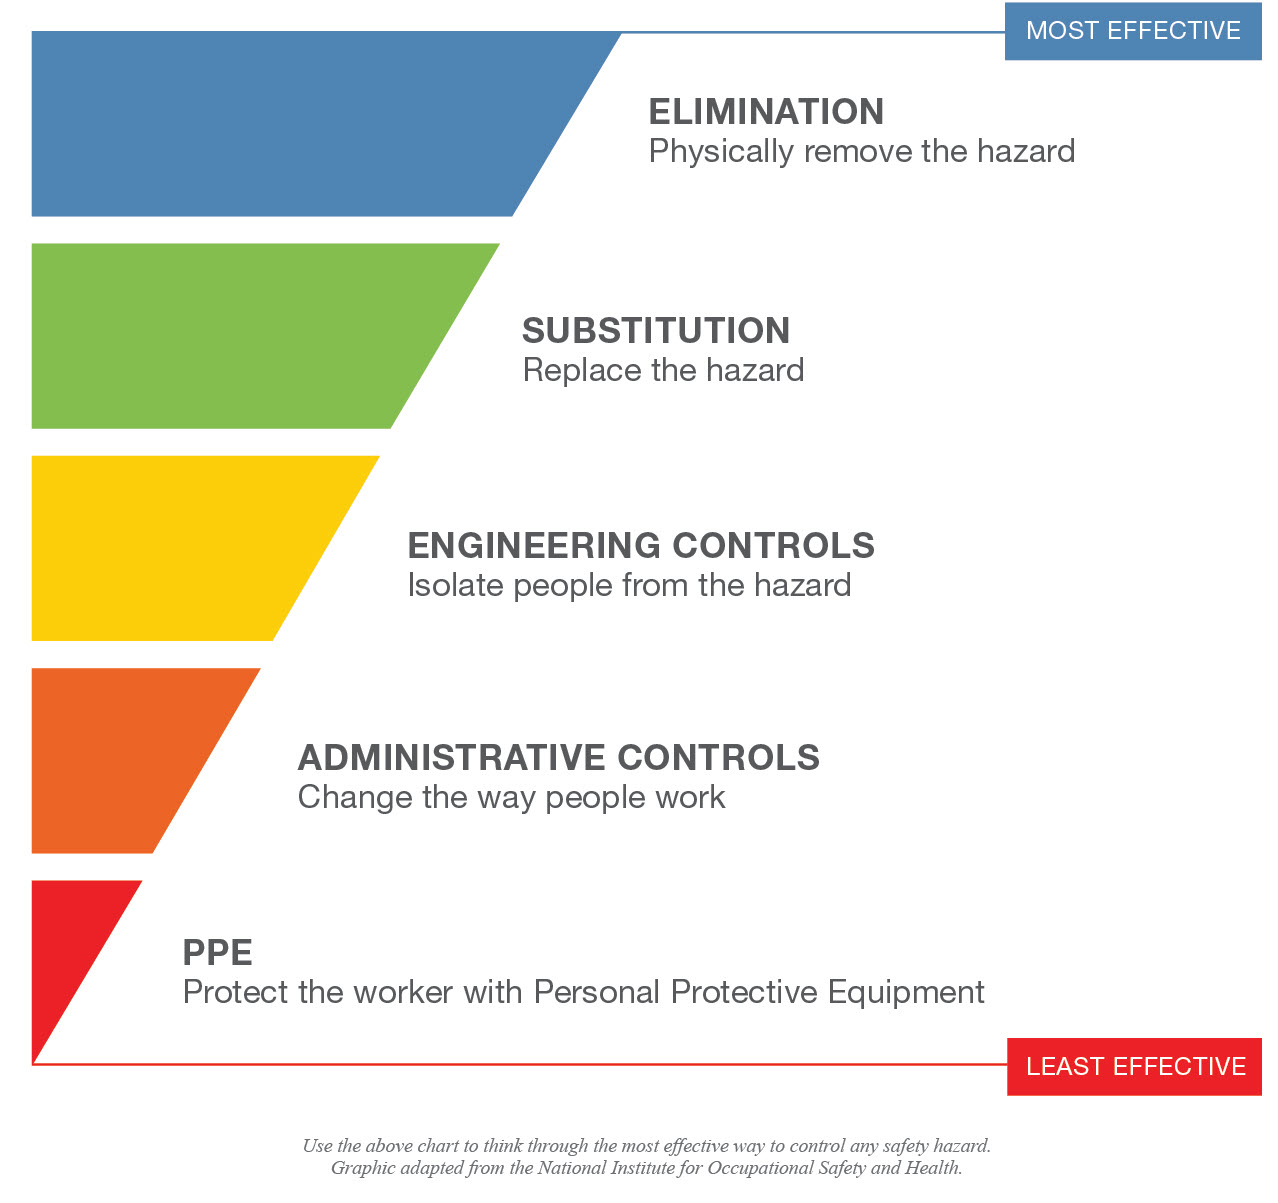 Hierarchy of controls from most effective to least effective: 1) Elimination: Physically remove the hazard. 2) Substitution: Replace the hazard. 3) Engineering controls: Isolate people from the hazard. 4) Administrative controls: Change the way people work. 5) PPE: Protect the worker with Personal Protective Equipment